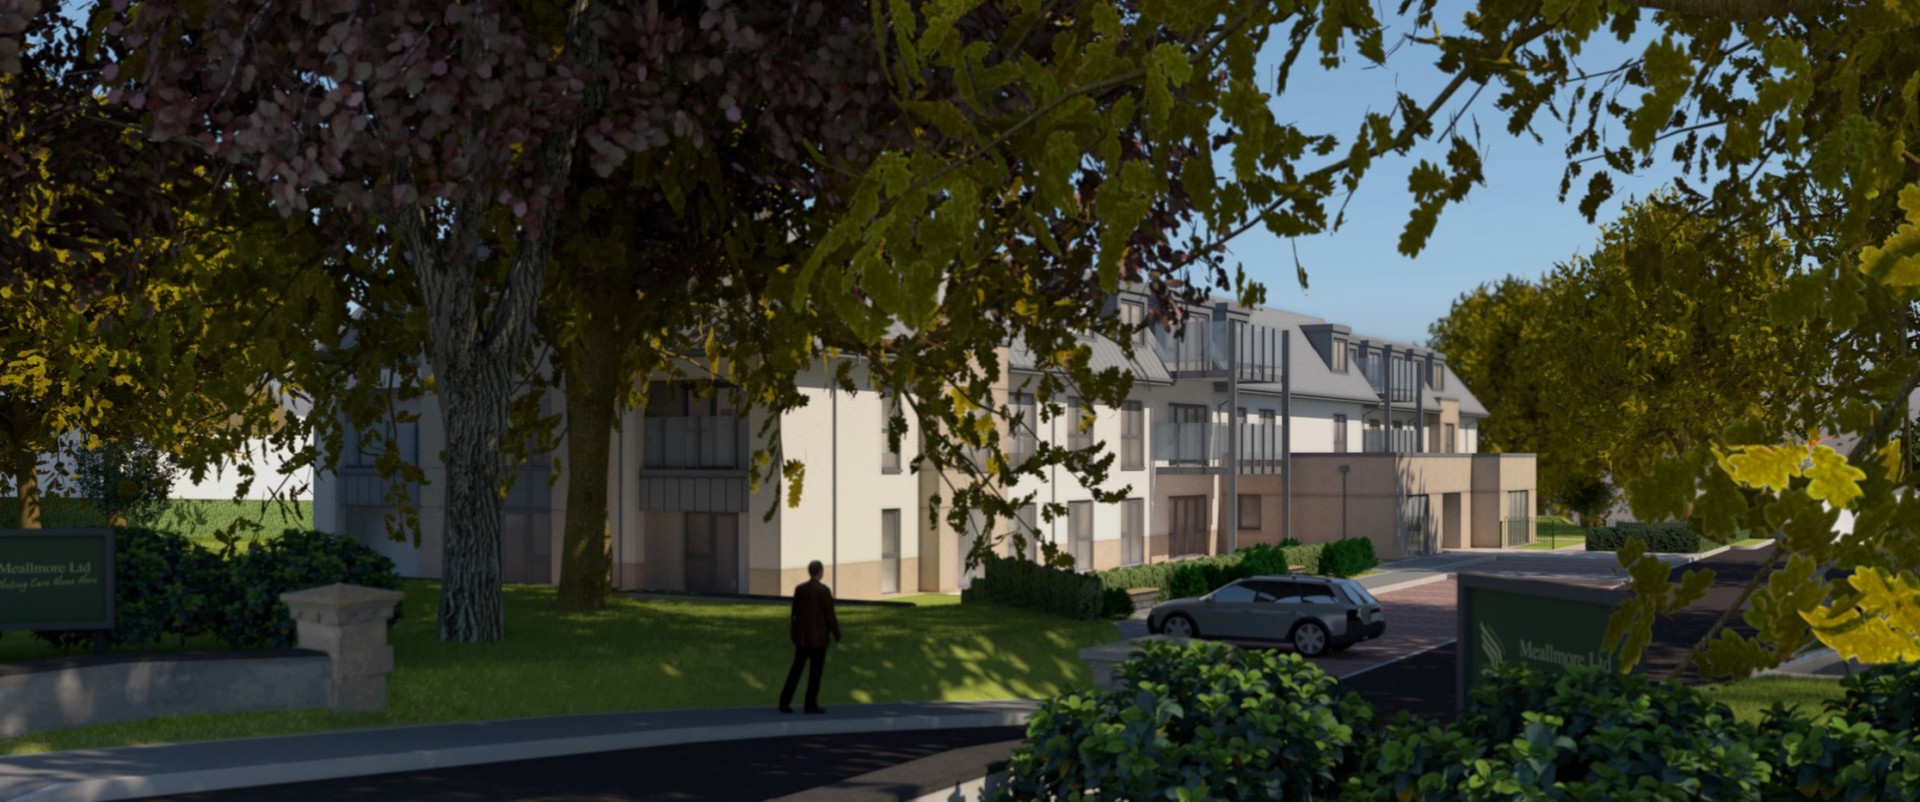 Care home application lodged for Broughty Ferry hotel site